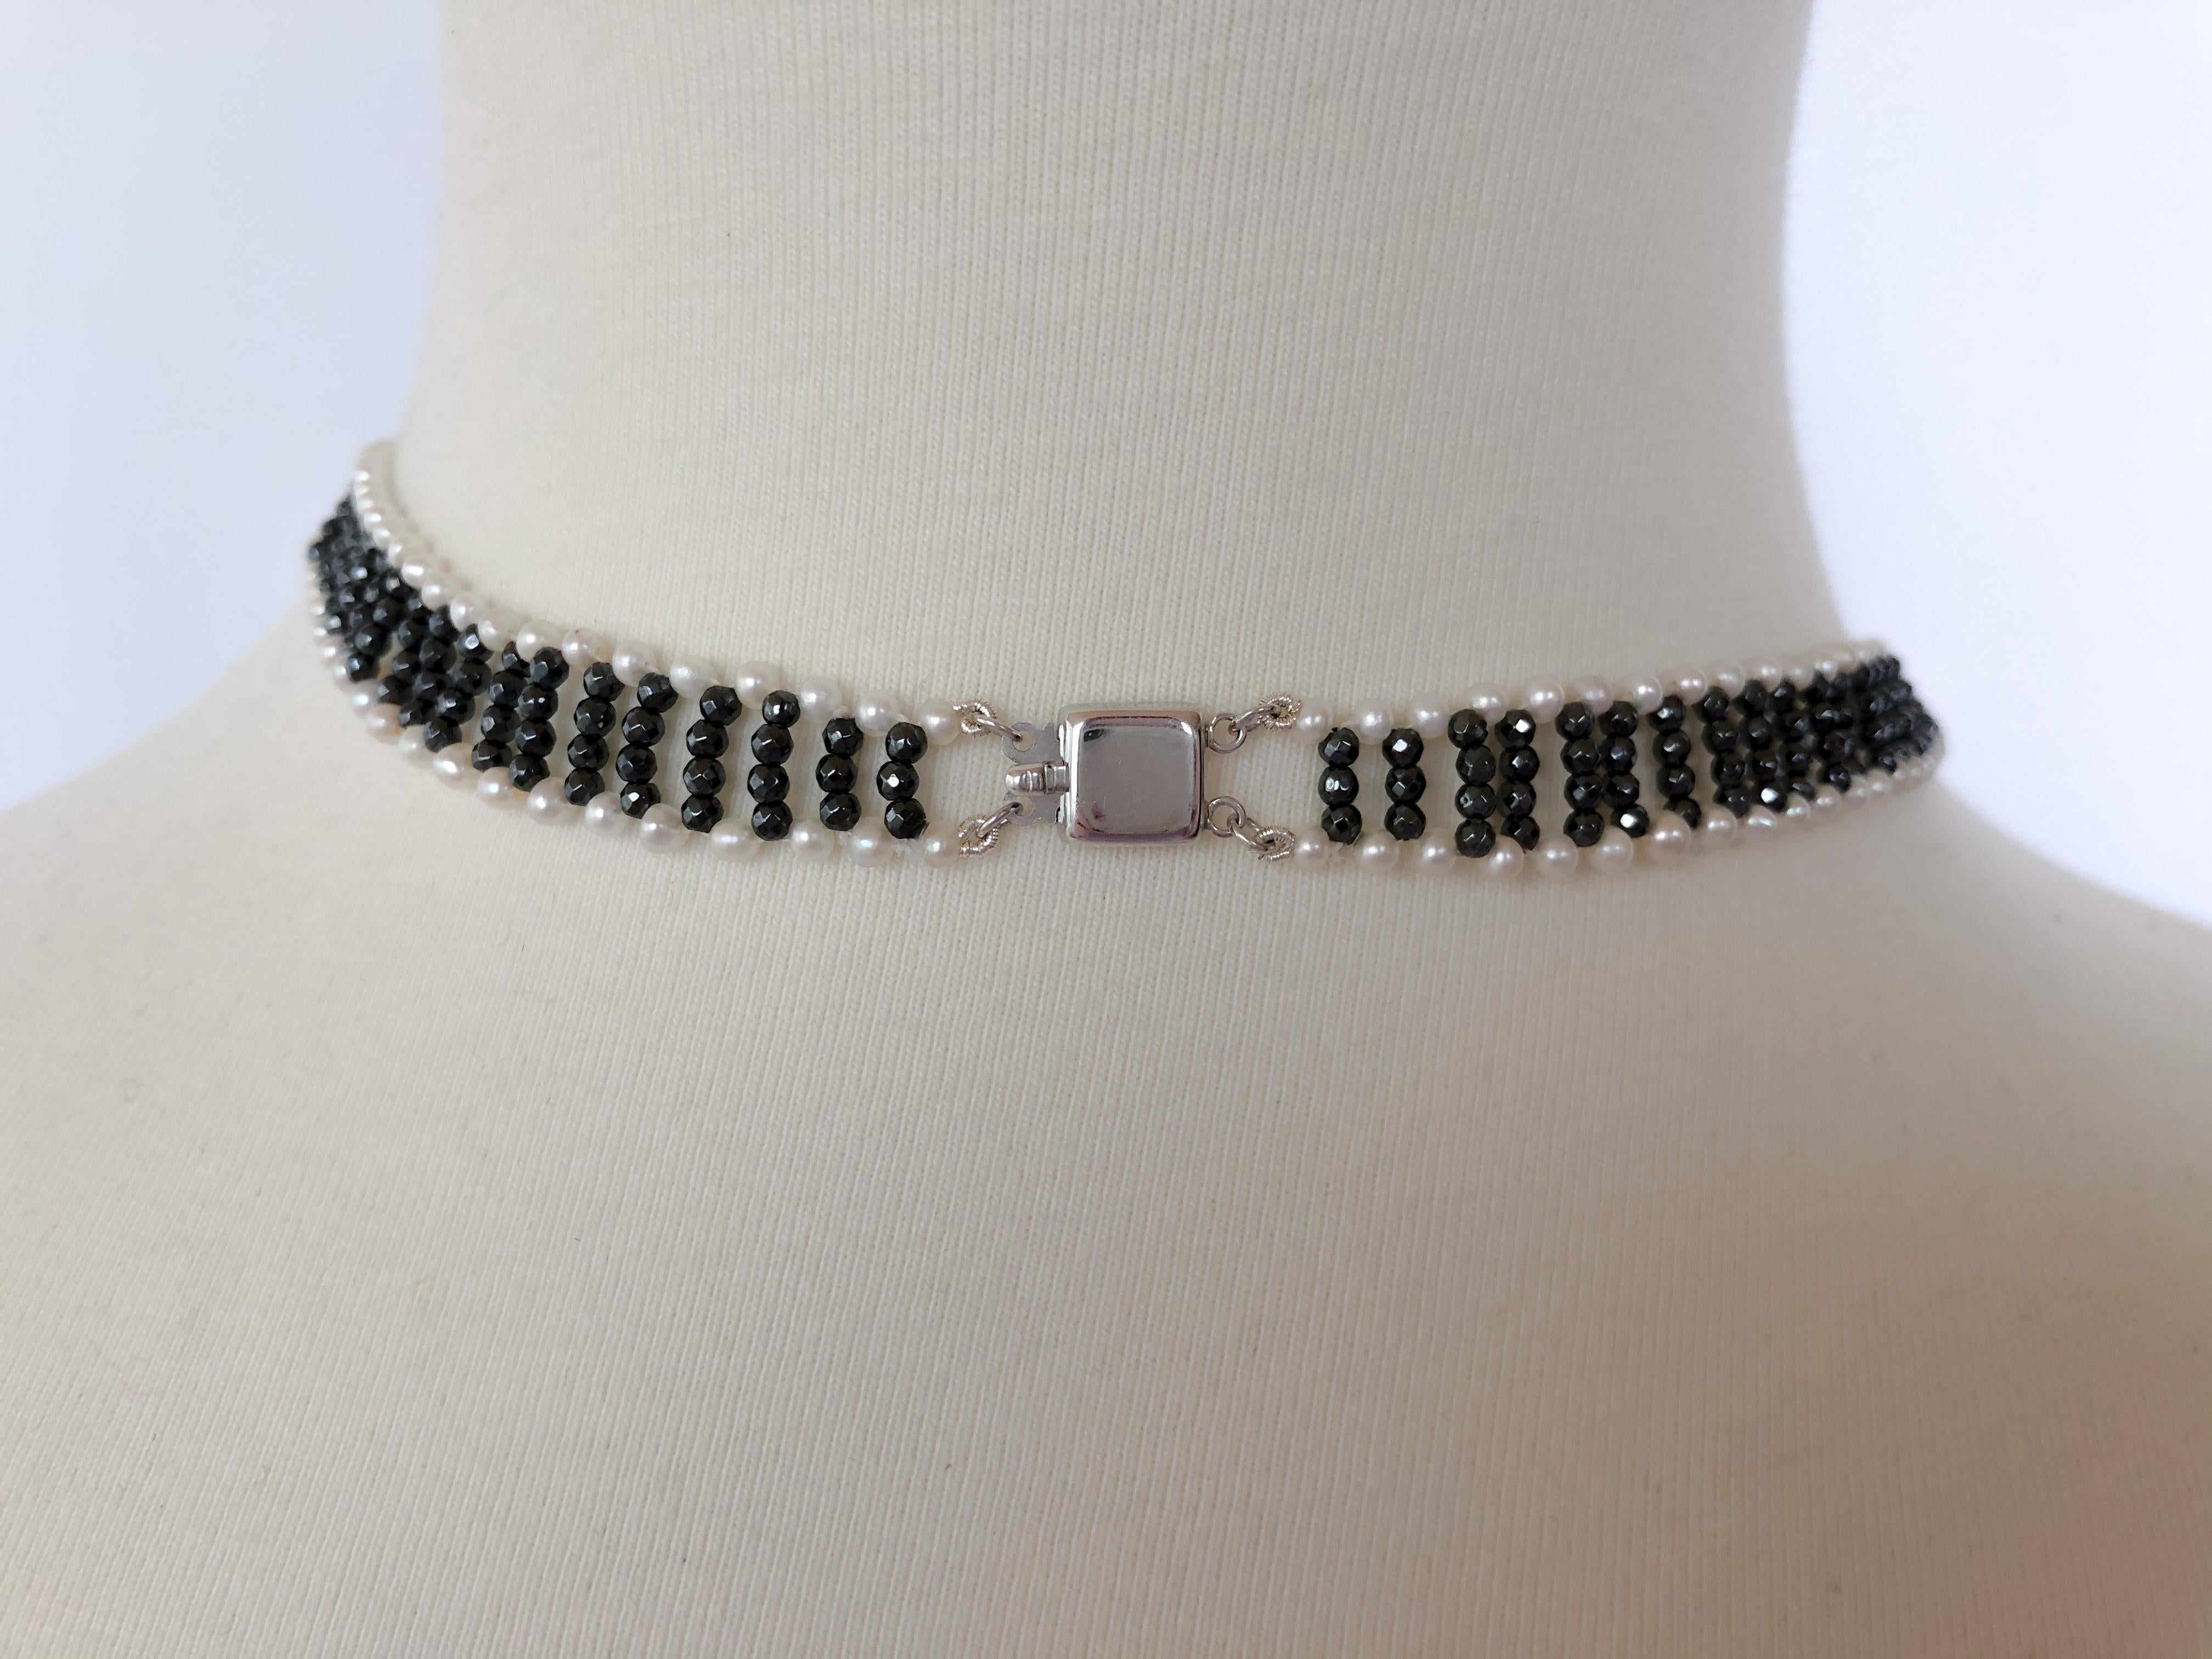 Brilliant Cut Marina J. Pearl and Hematite Necklace with Diamonds and 14 Karat Gold Clasp